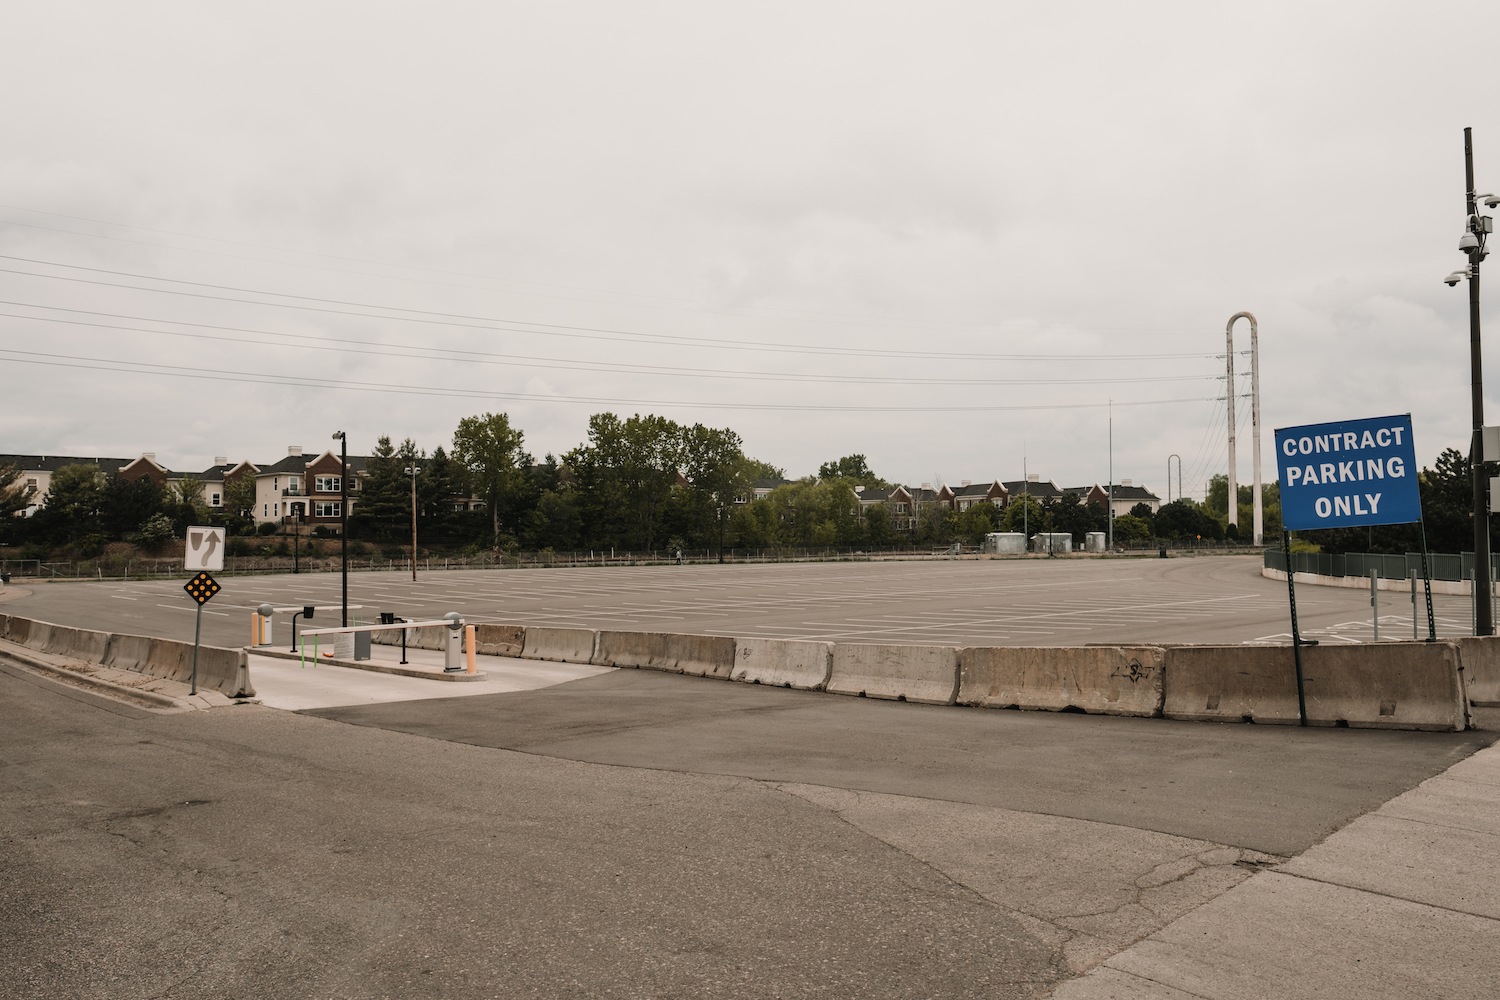 empty lot for potential use by Gavin Kaysen and team May 2020